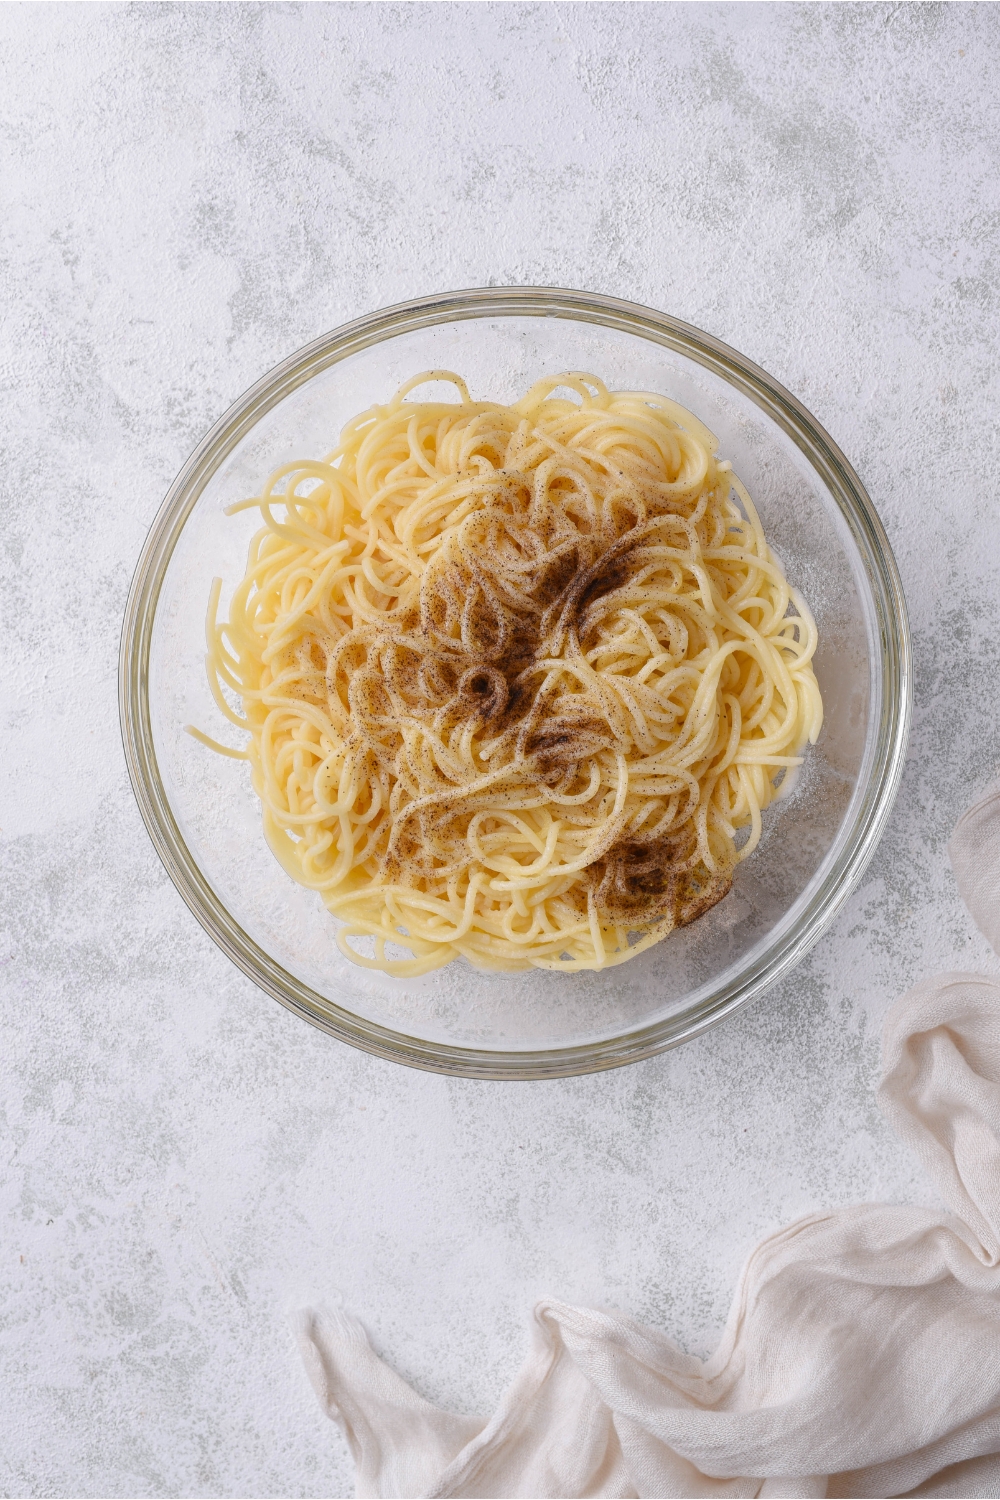 A bowl of spaghetti noodles with black pepper added but not mixed together.